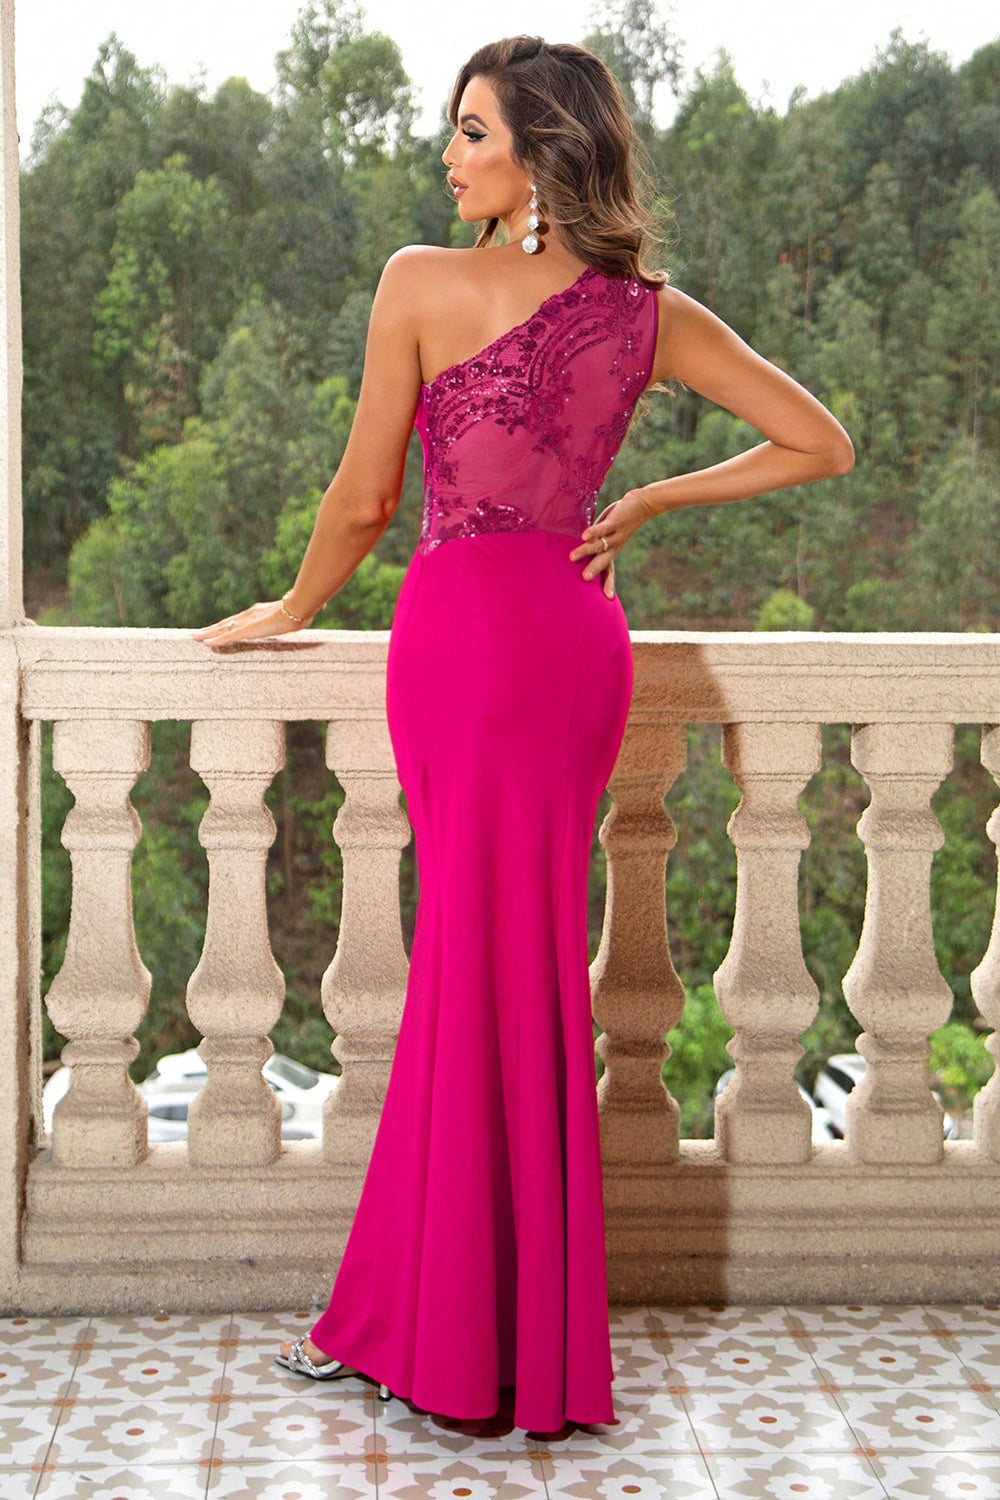 Elegant one-shoulder maxi dress available in red, black, green, hot pink. Perfect for formal events, it offers a sleek, flattering fit.